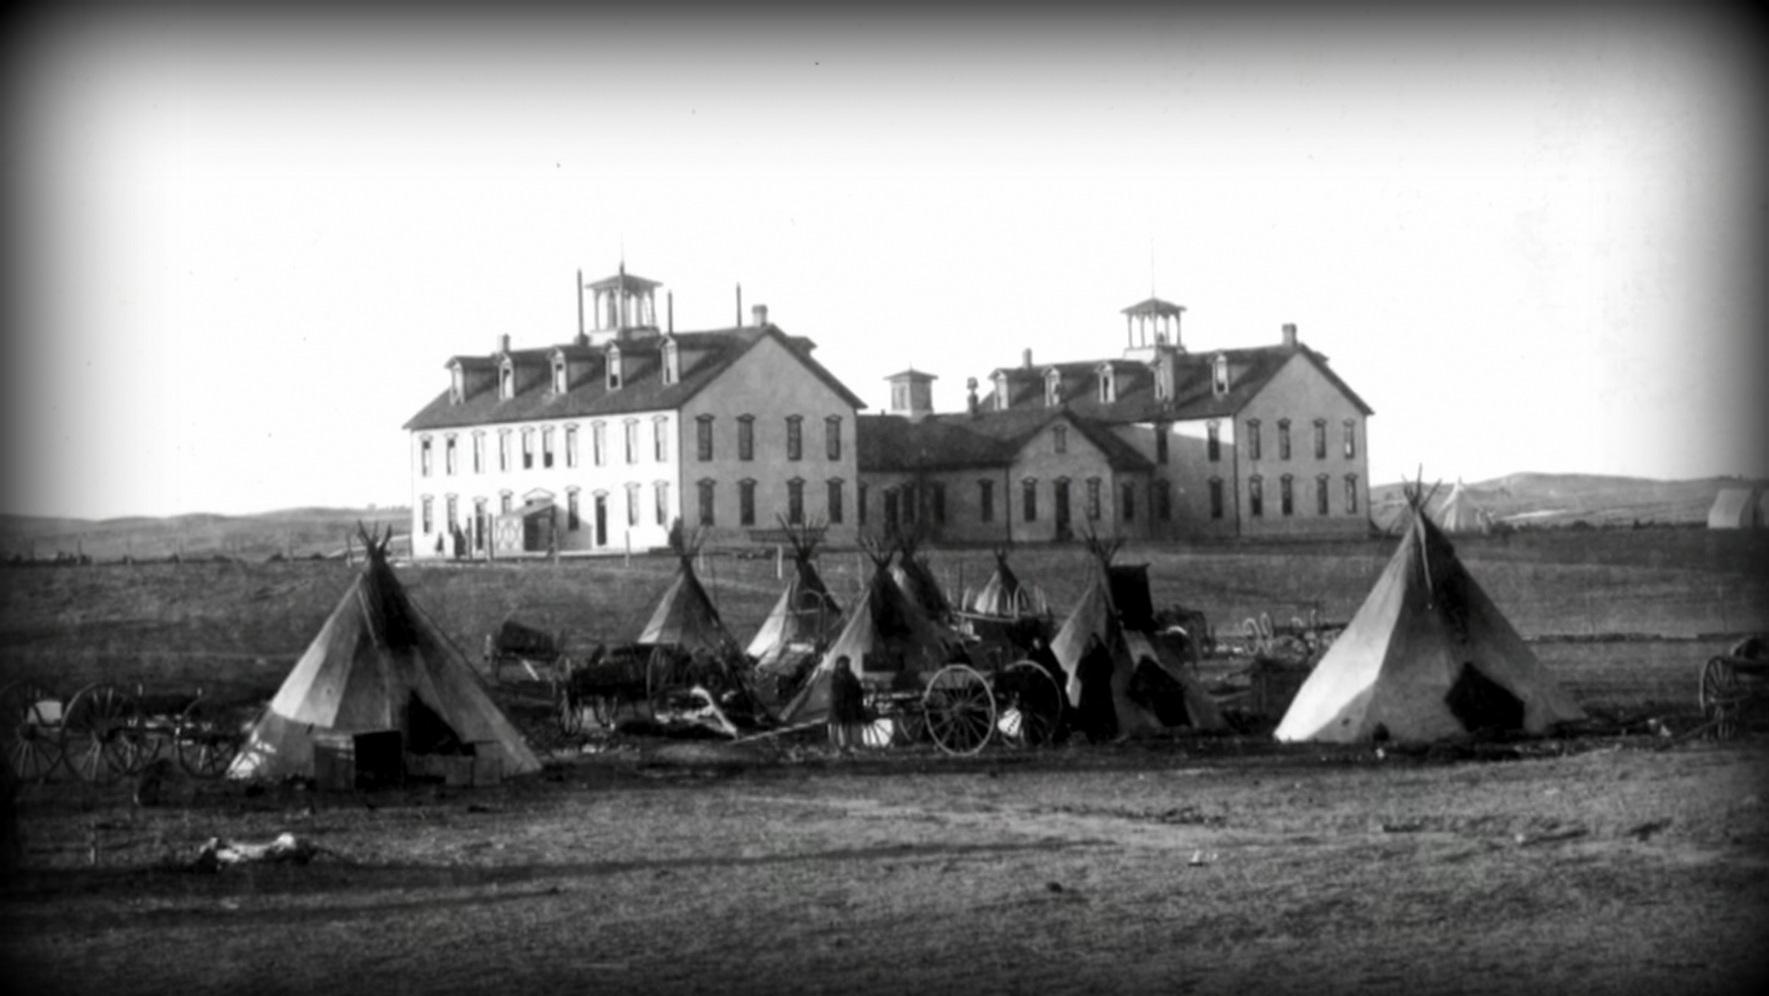 Archival photo of eight teepees set up in a camp in front of three buildings in the background. 